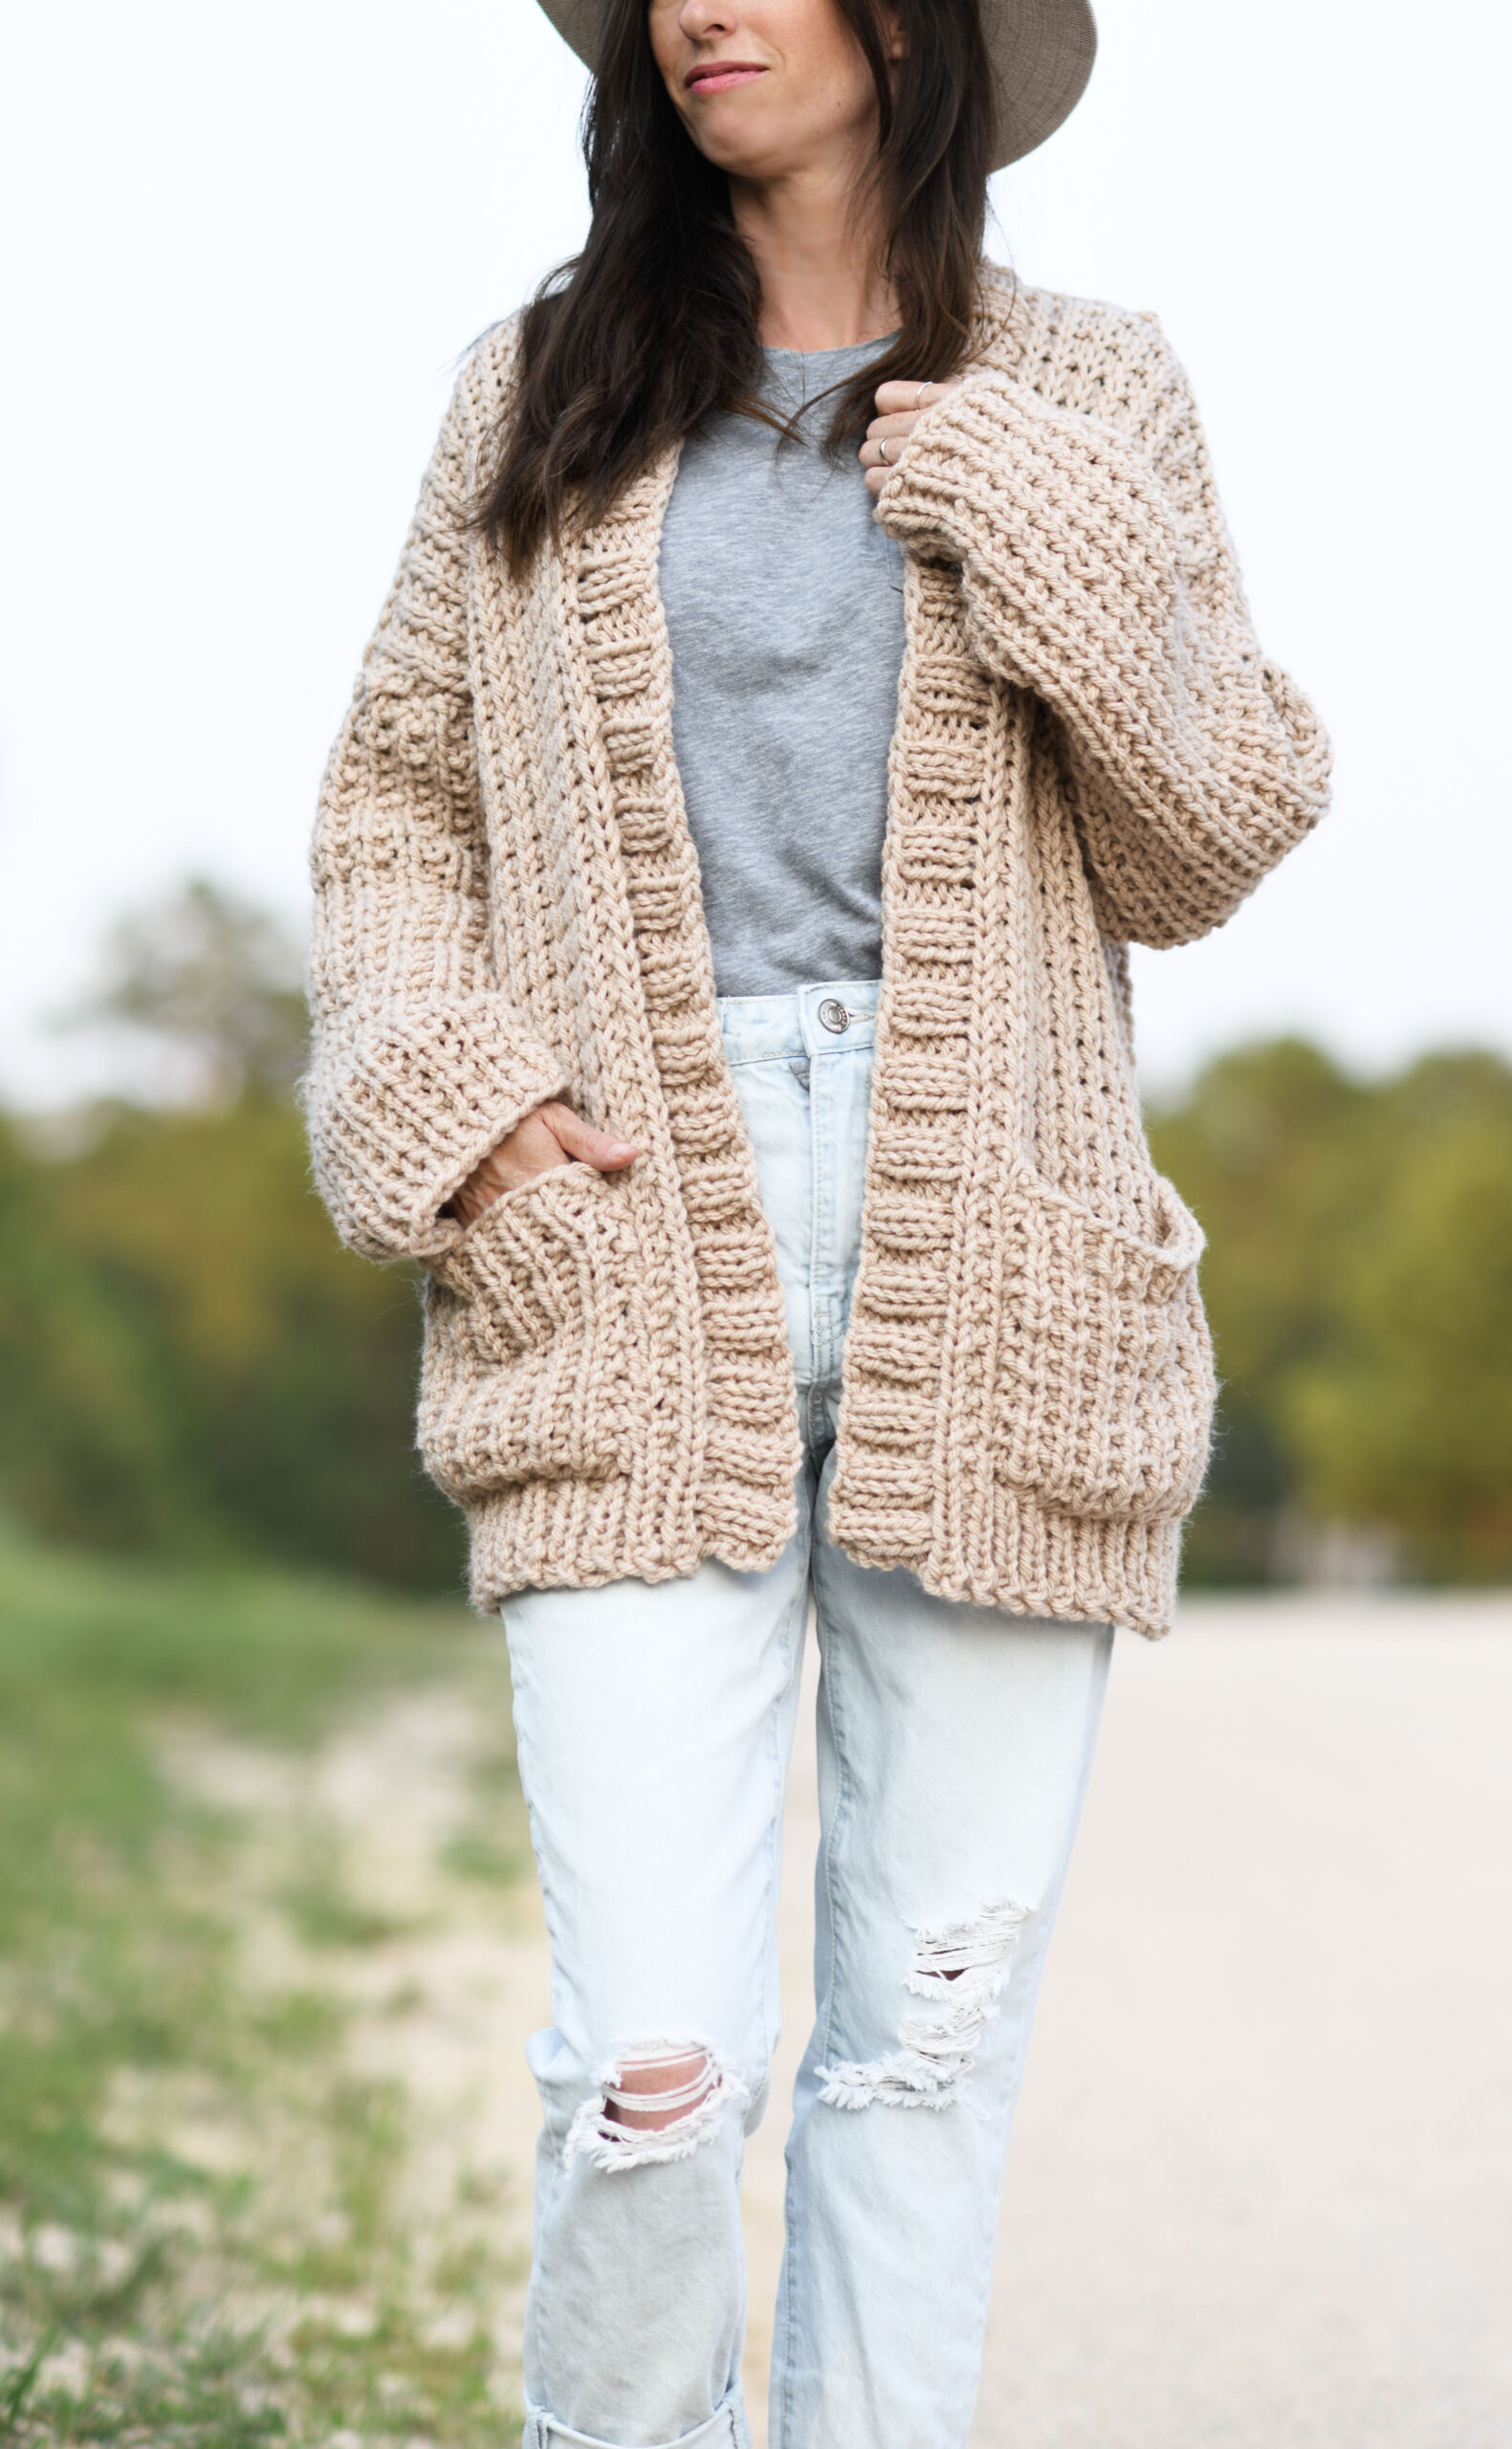 My Big Comfy Ribbed Cardi Knitting Pattern, Easy Knit Sweater